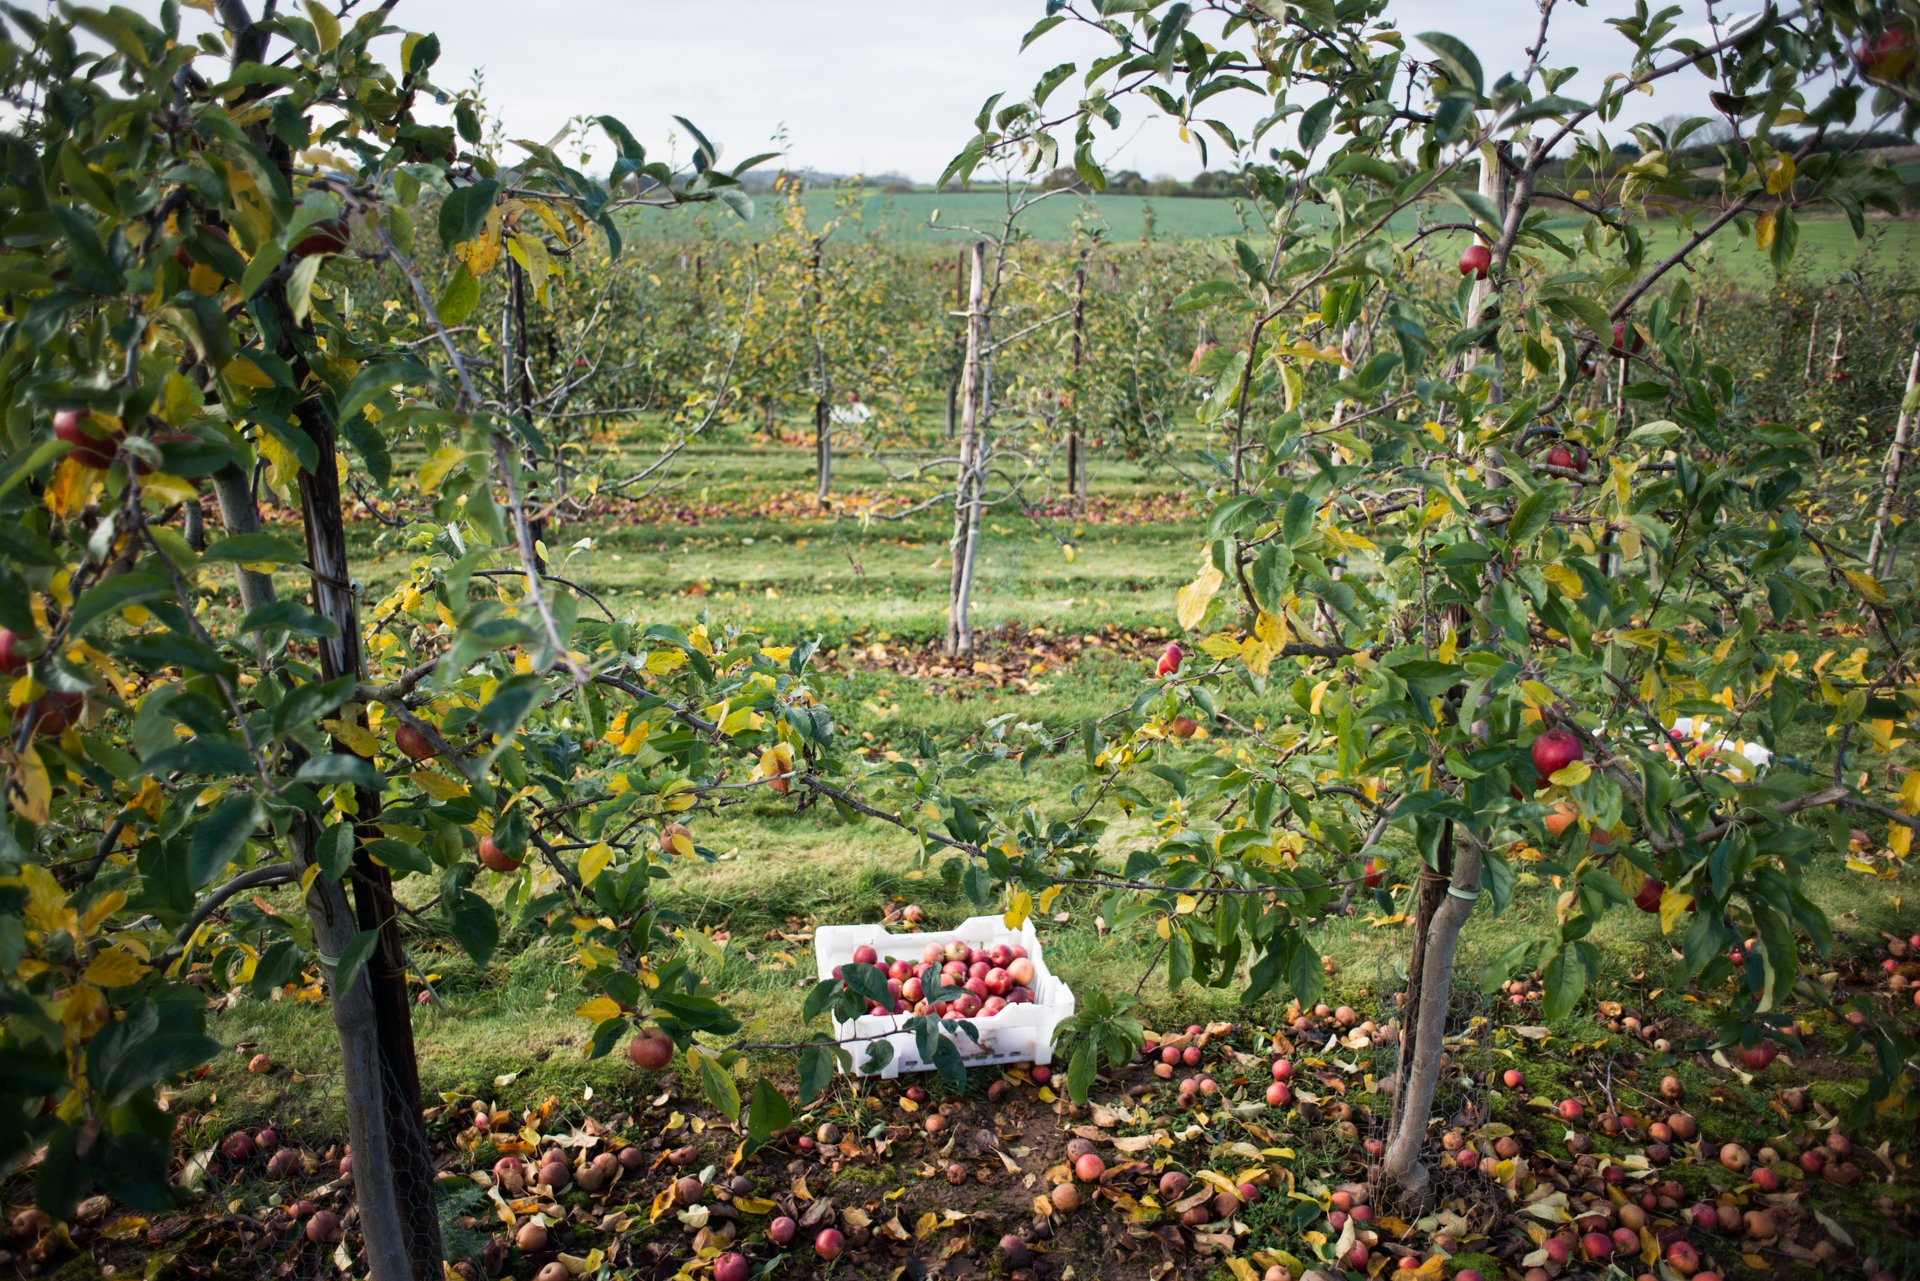 The Gleaning Network - Documenting food waste in the UK - Chris King Photography